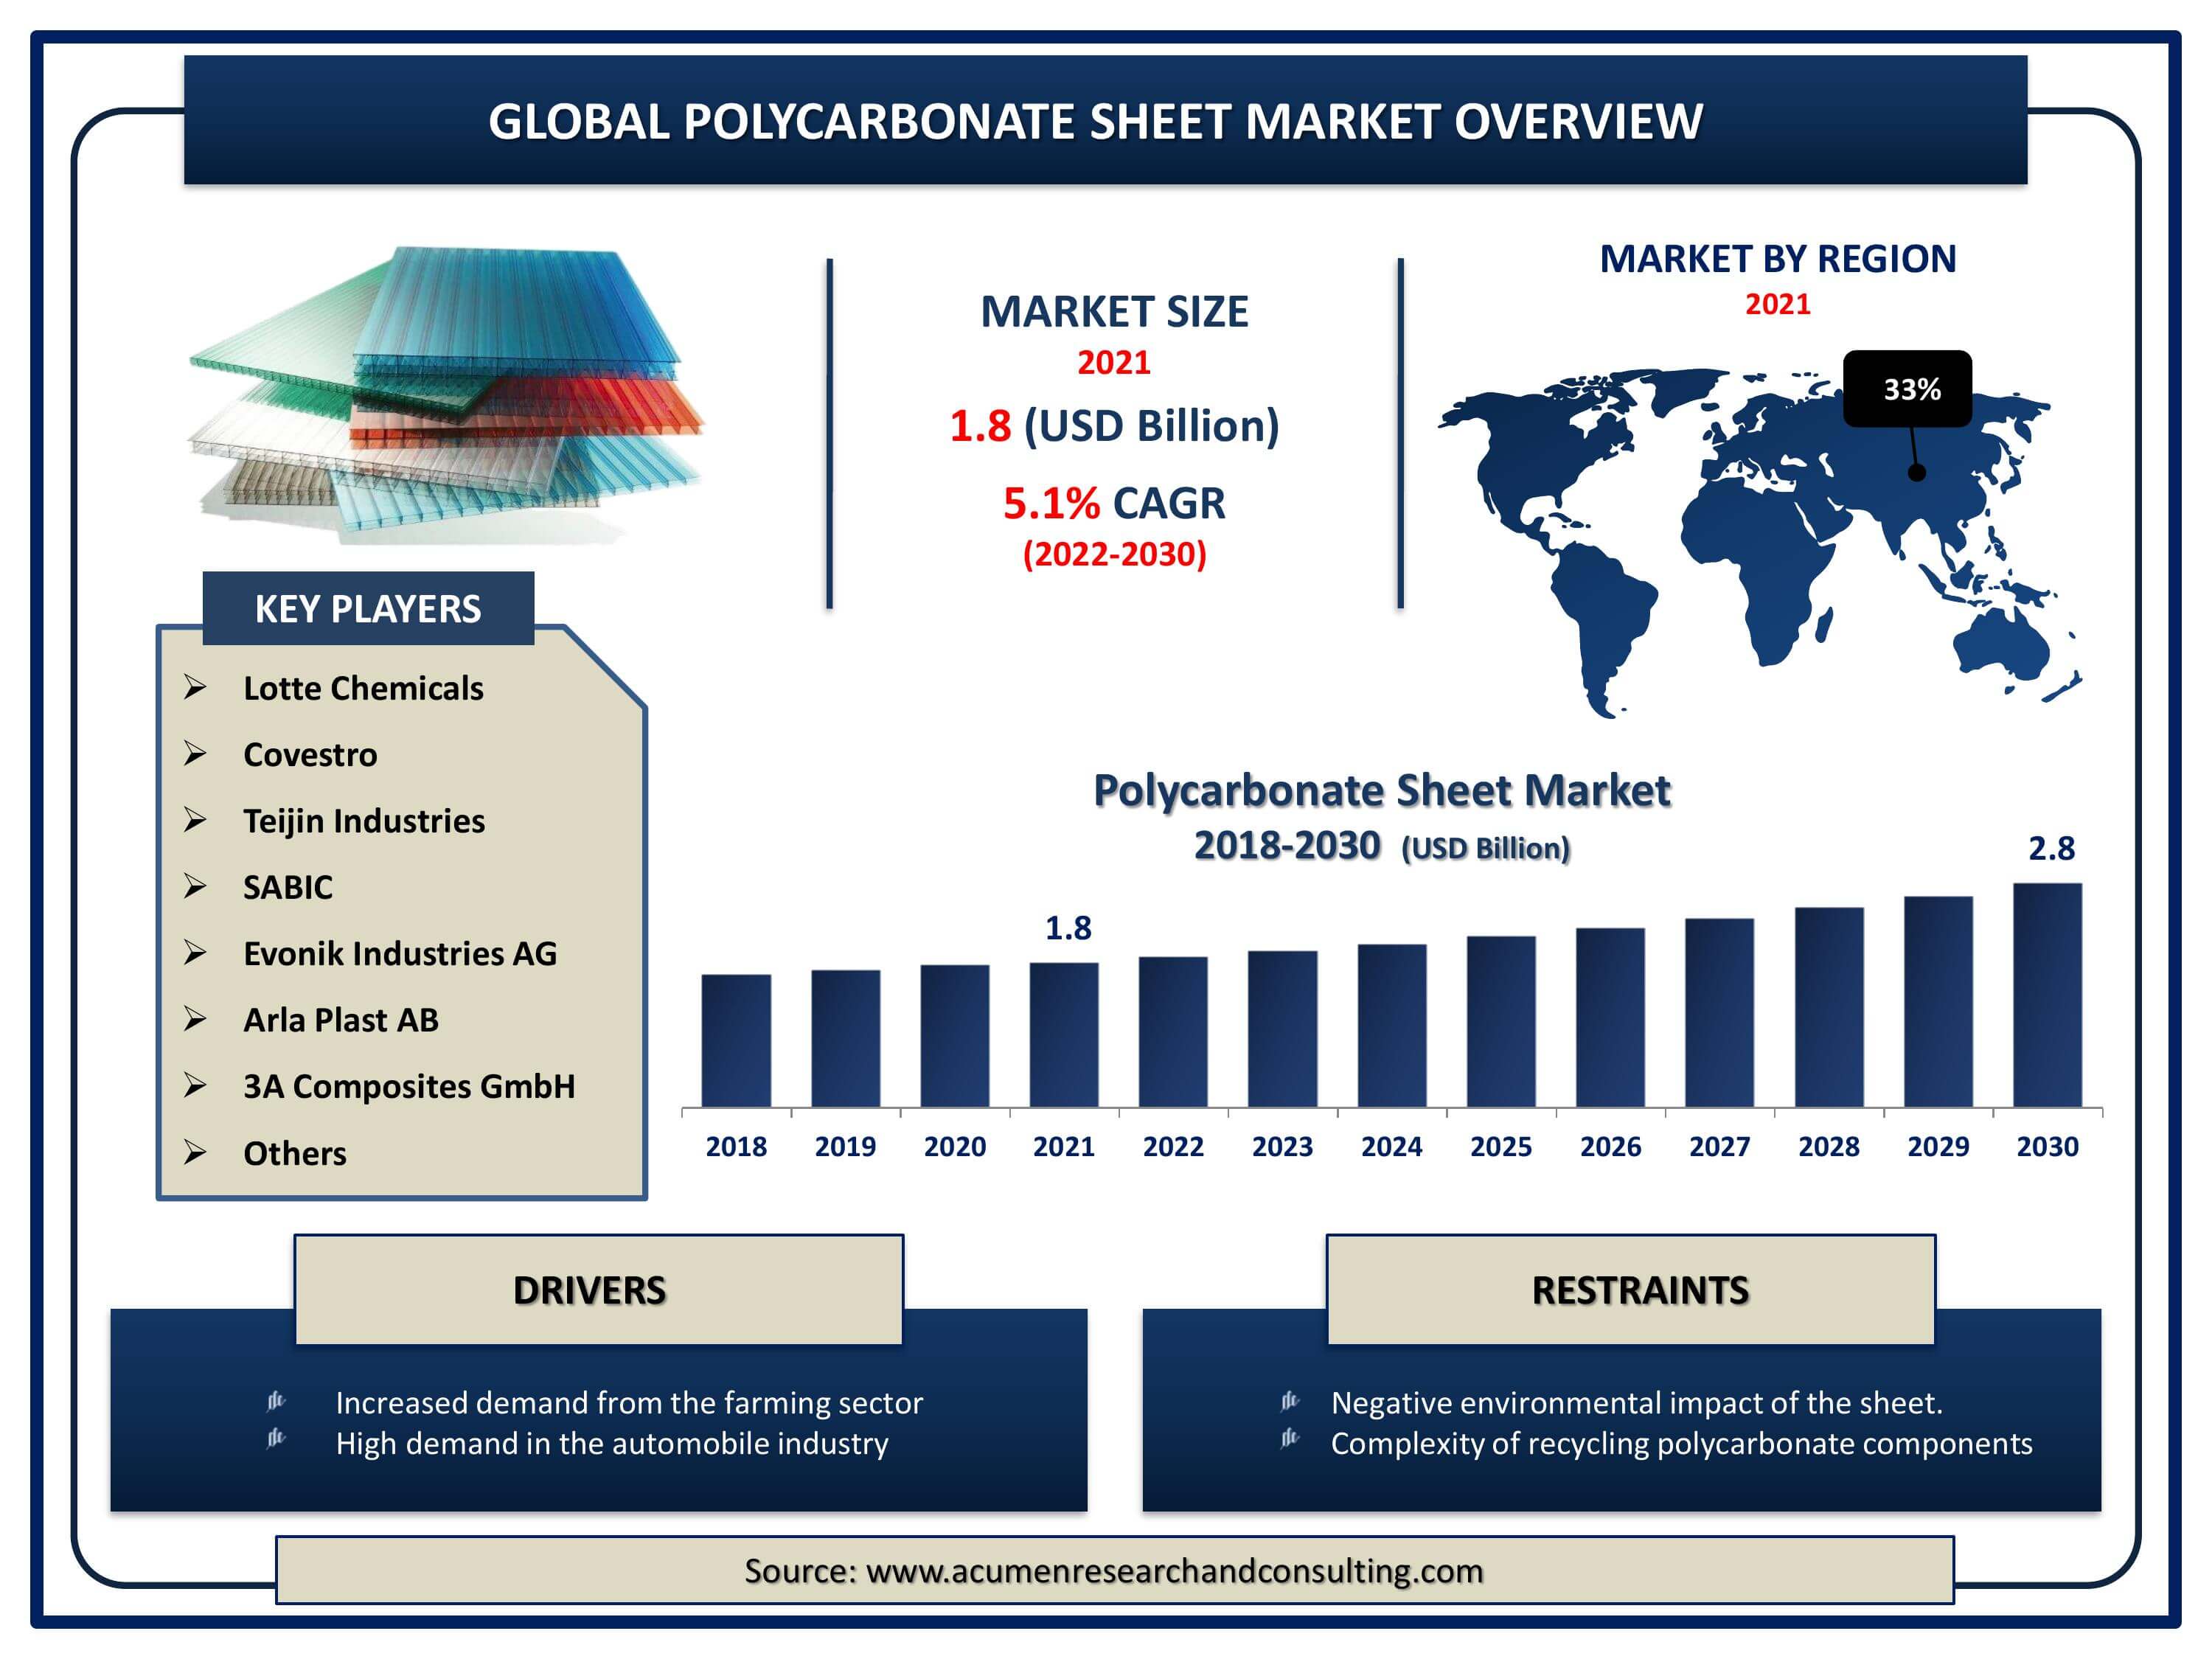 Global polycarbonate sheet market revenue is estimated to expand by USD 2.8 billion by 2030, with a 5.1% CAGR from 2022 to 2030.